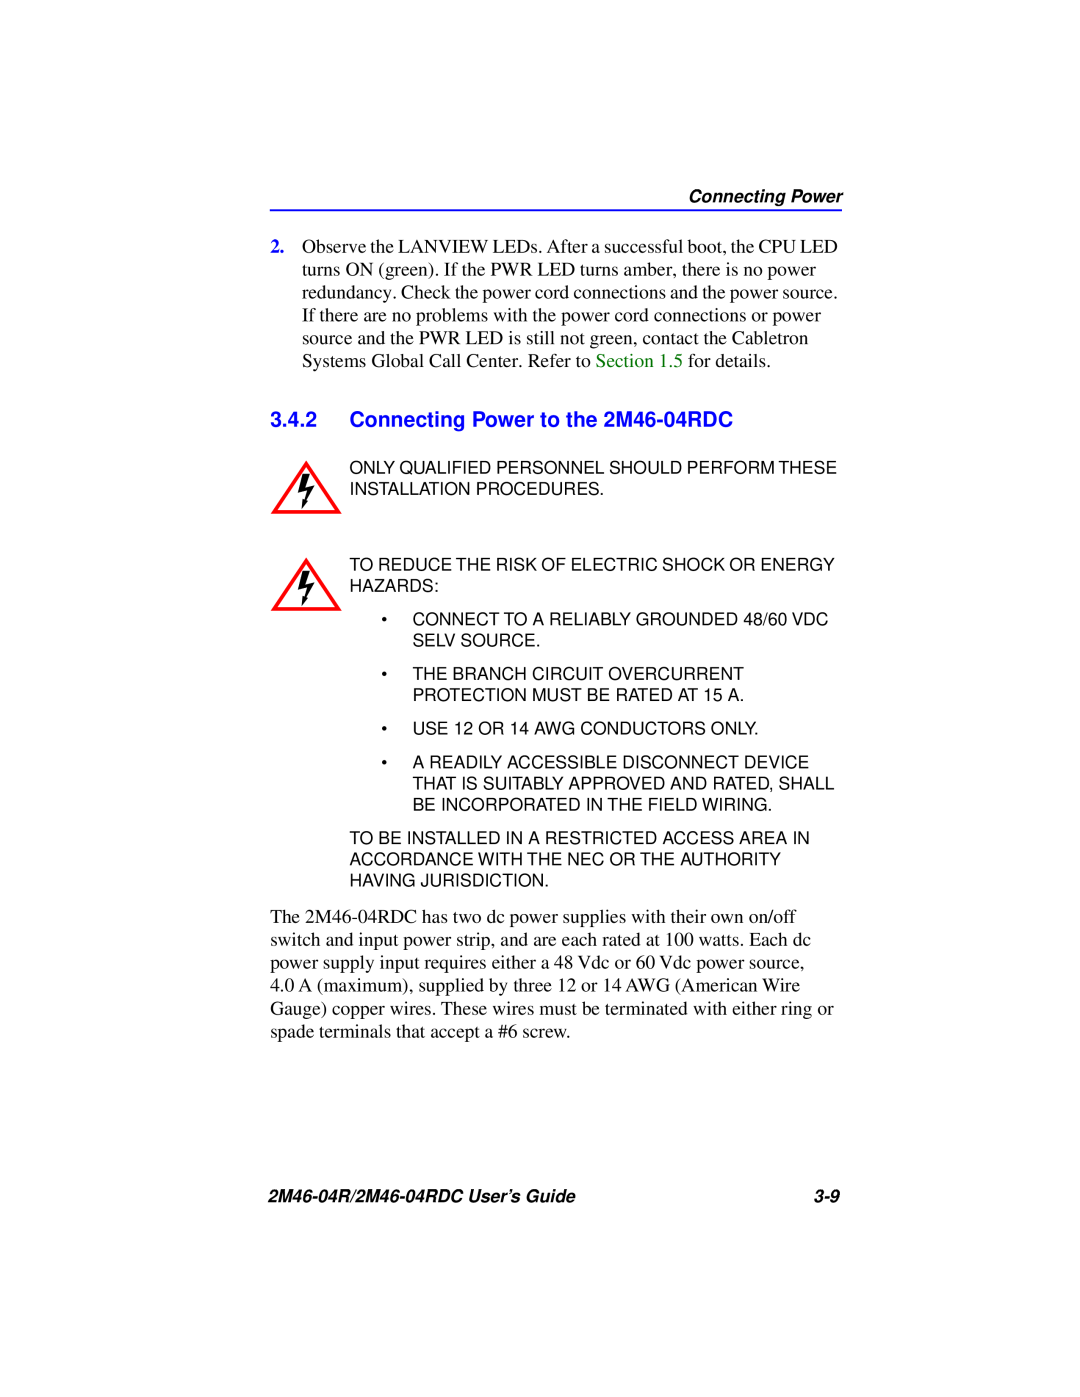 Cabletron Systems pmn manual Connecting Power to the 2M46-04RDC 